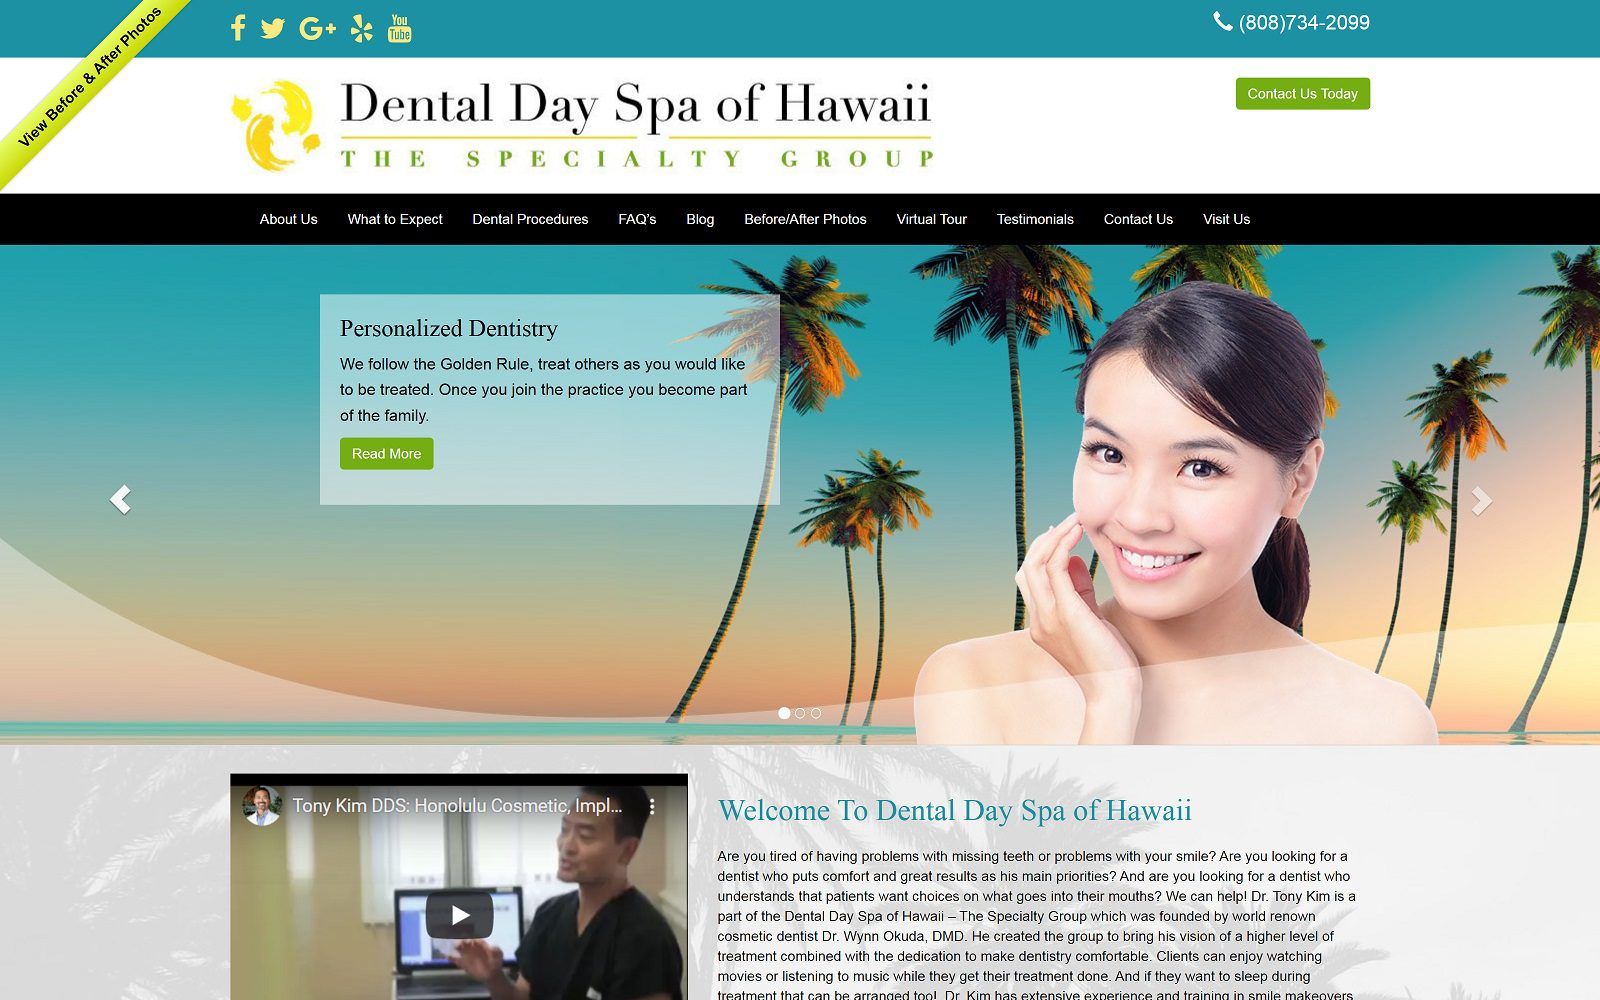 The screenshot of tony kim, dds cosmetic, implant and biological dentistry website